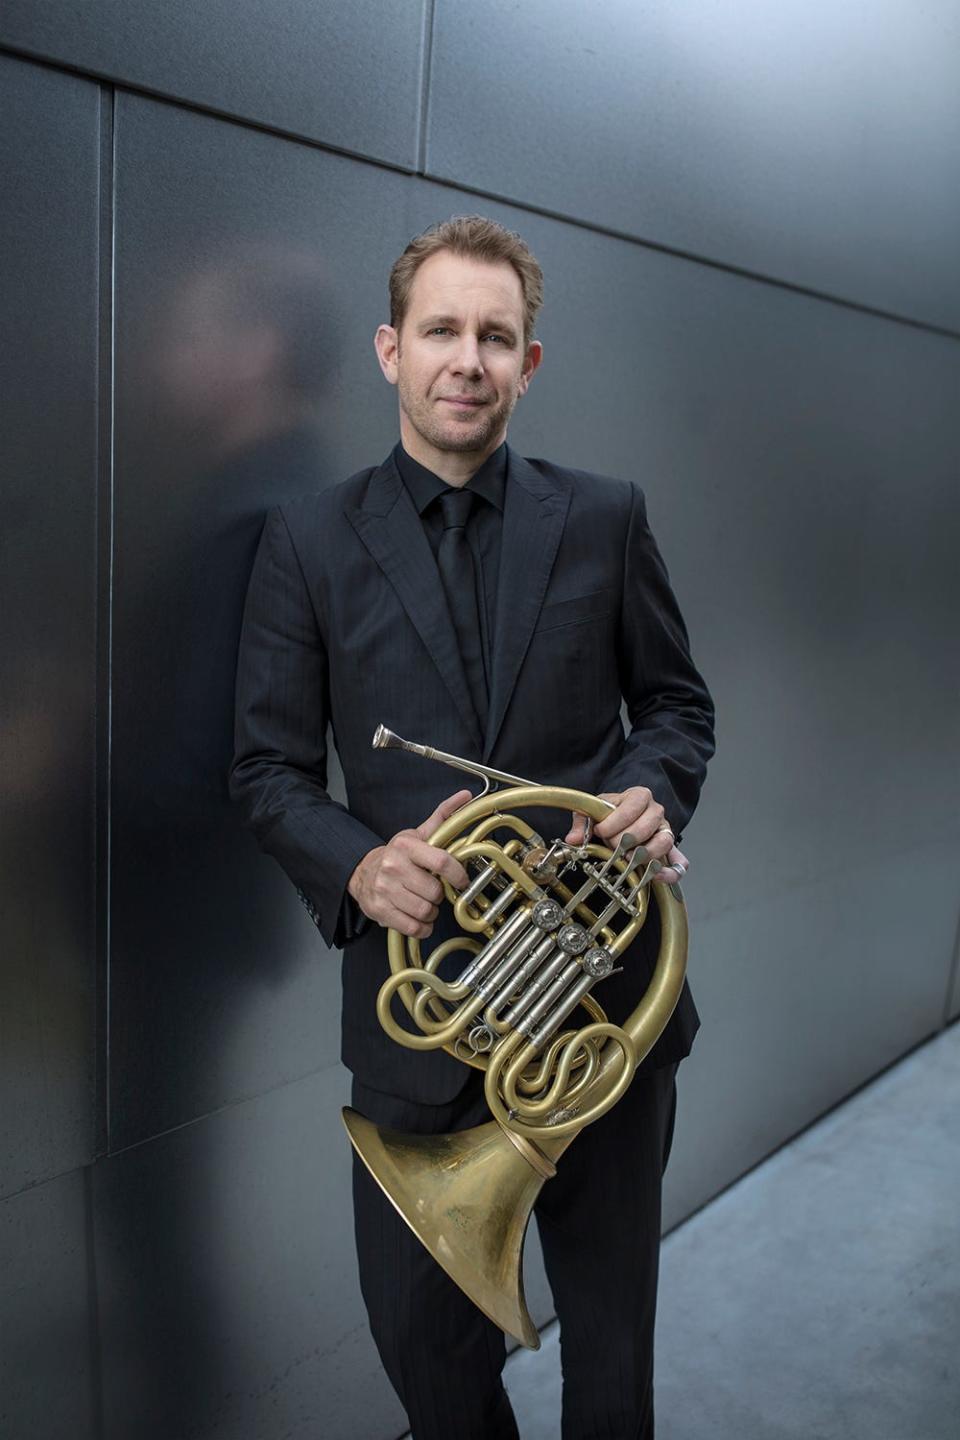 Andrew Bain, principal horn for the Los Angeles Philharmonic, will be a guest soloist with The Venice Symphony.